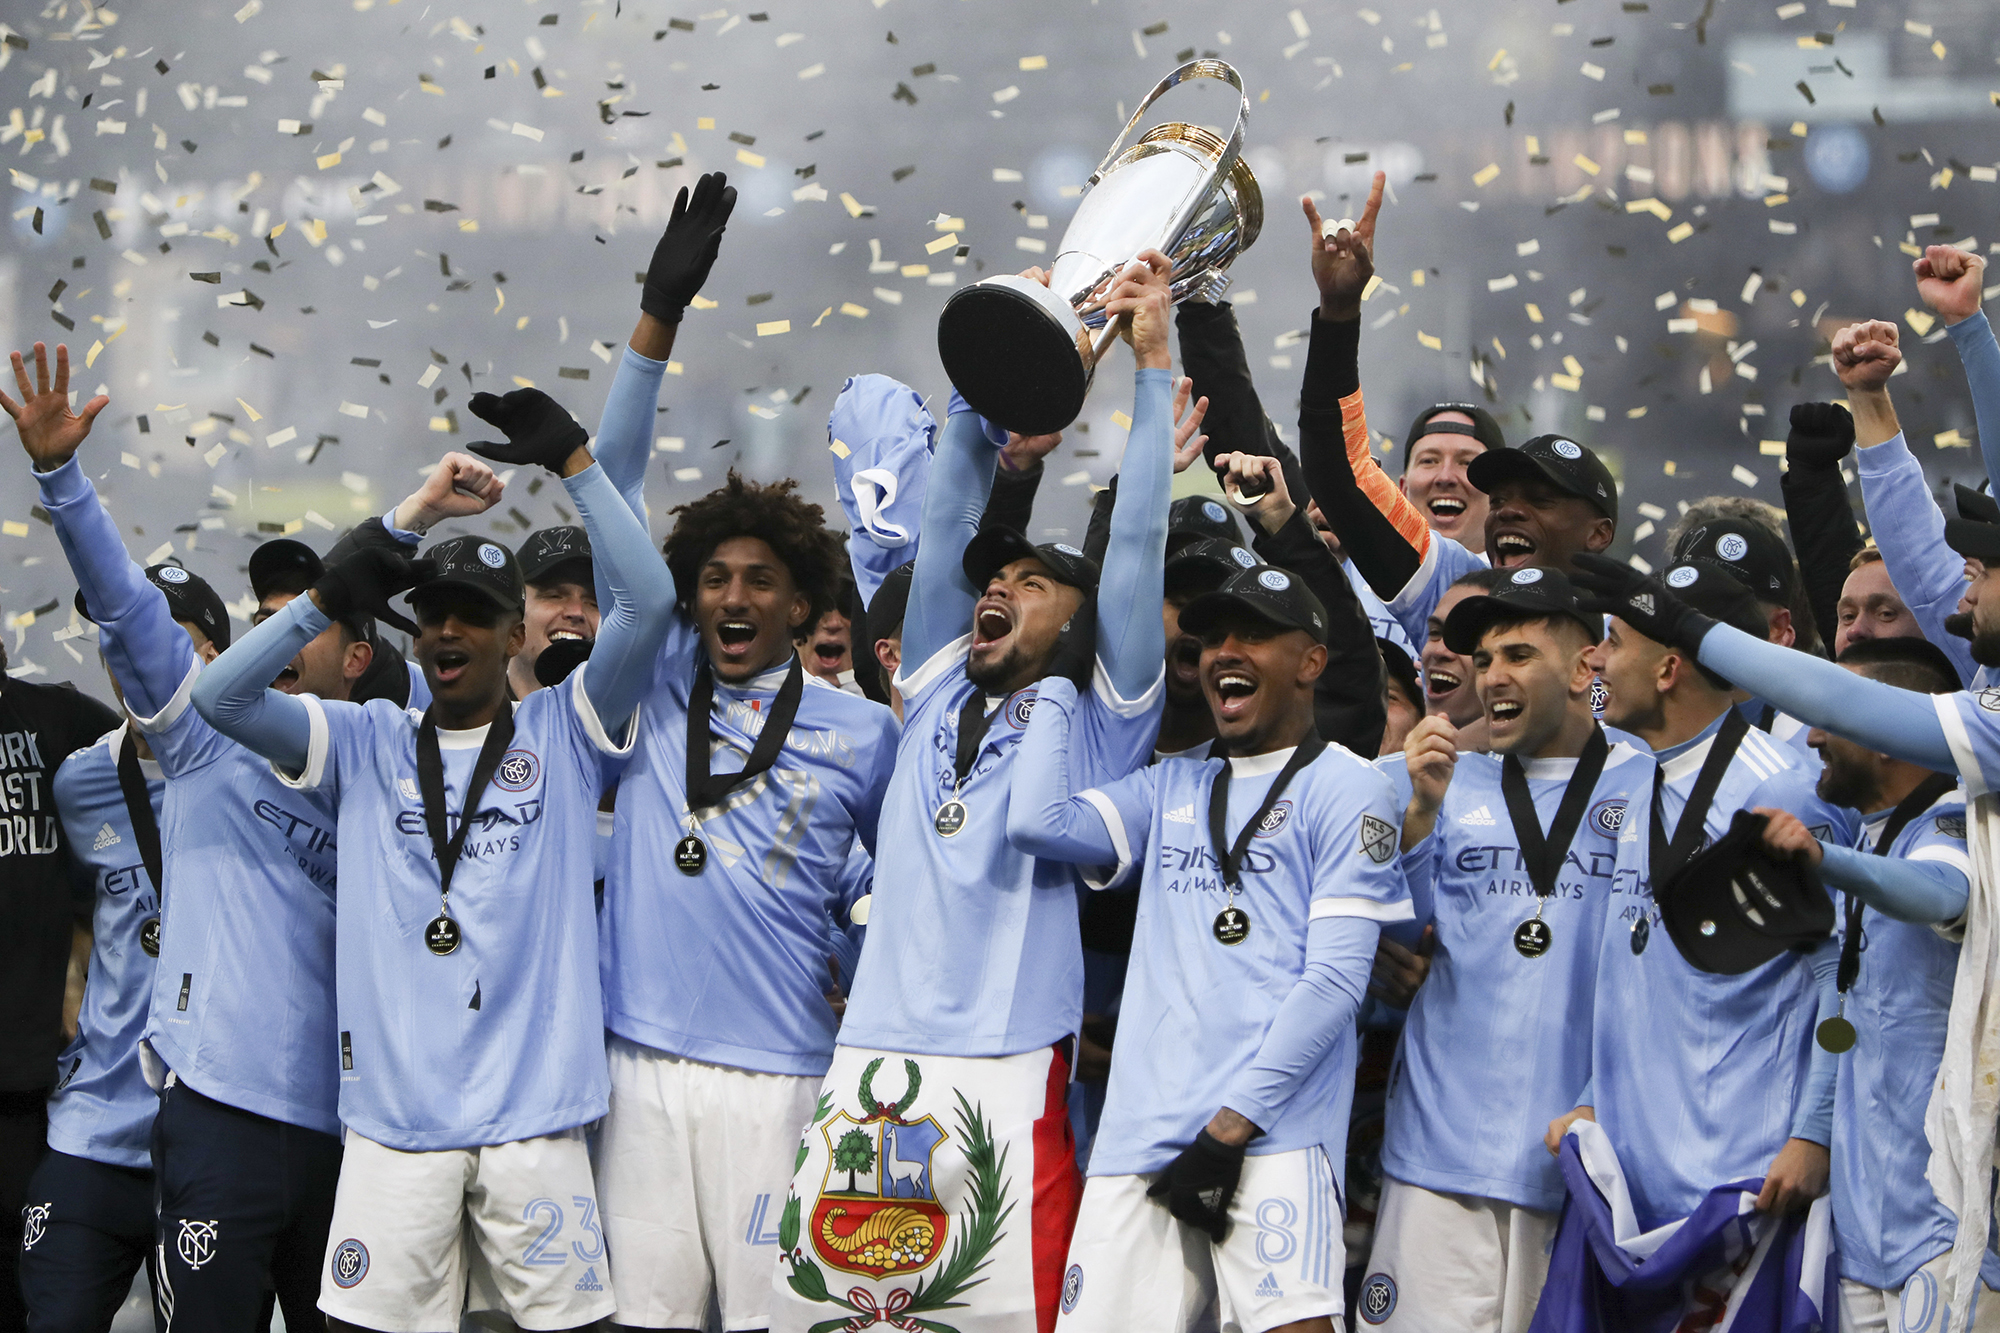 New York City FC players celebrate with the trophy after their penalty kick shootout win over the Portland Timbers in the MLS Cup soccer game, Saturday, Dec. 11, 2021, in Portland, Ore.